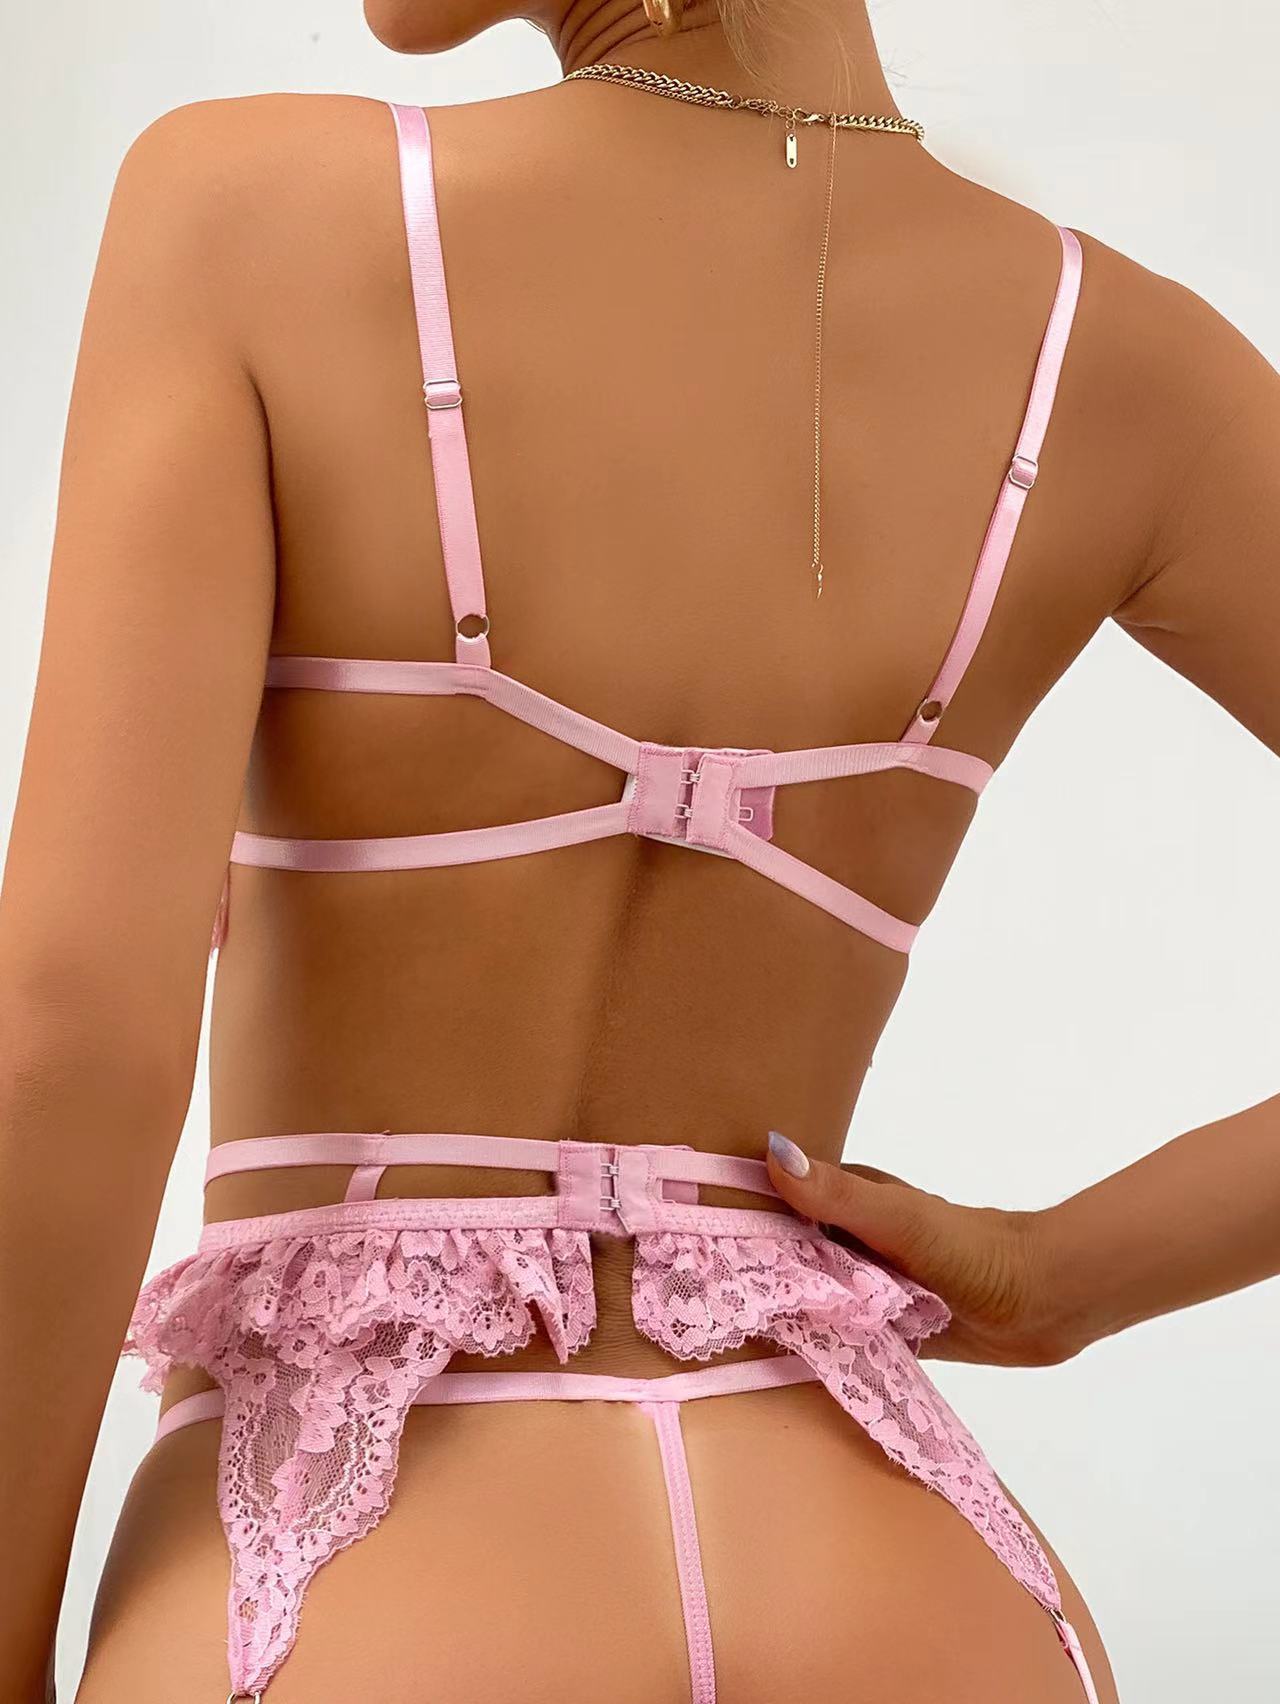 New Sexy Pink Lace Flower Perspective Lingerie Set